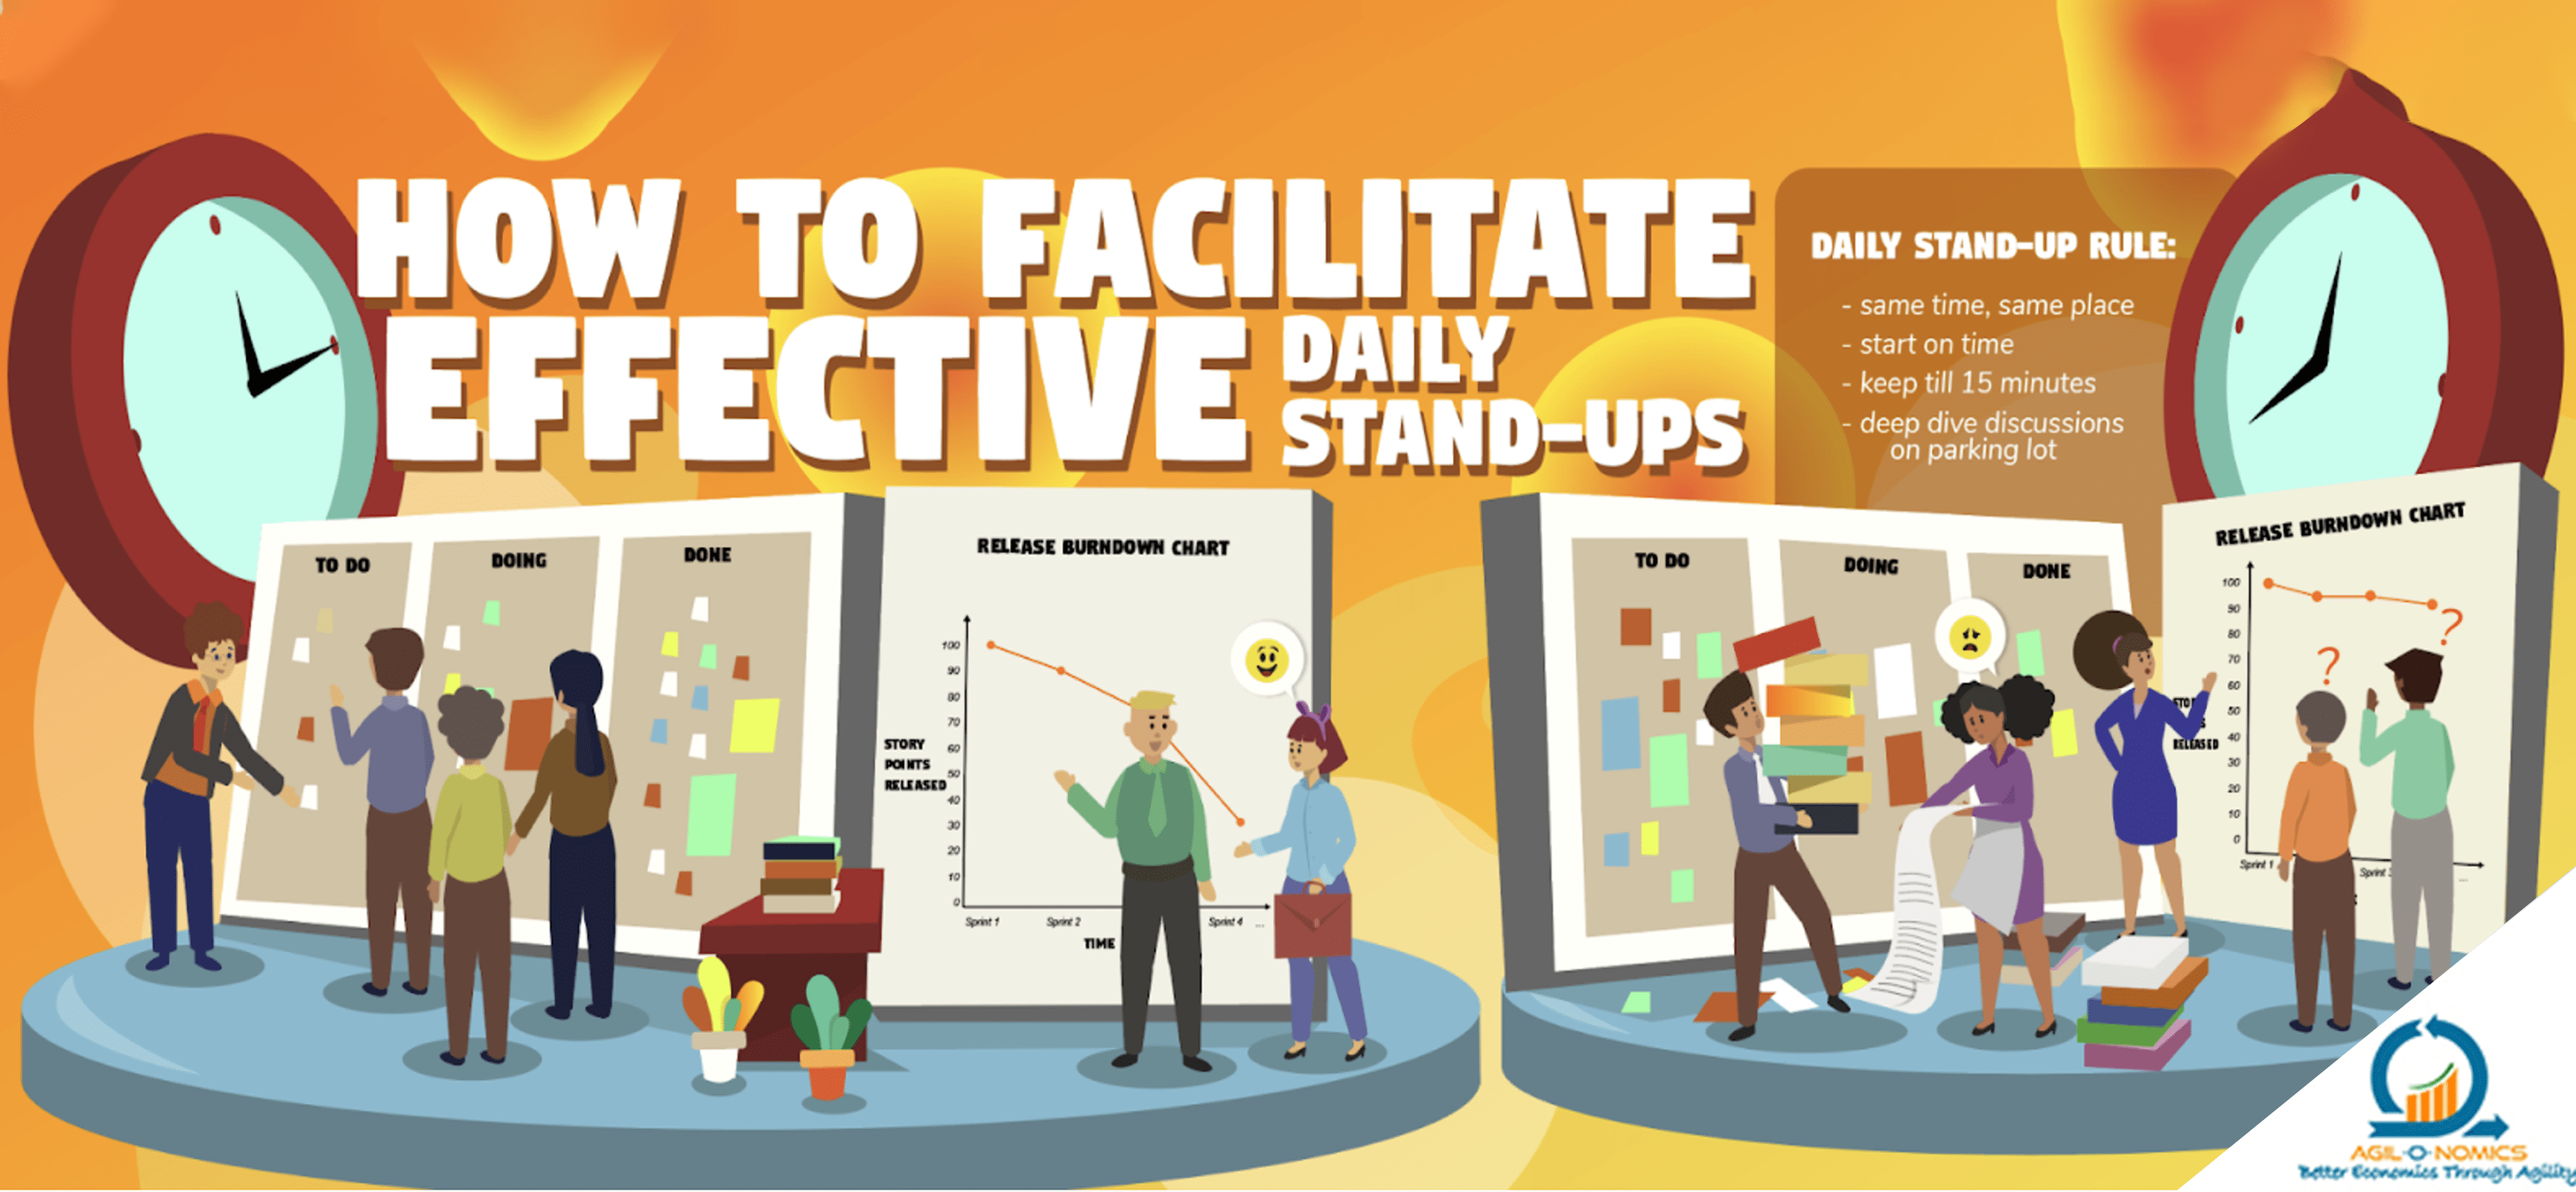 How to facilitate effective daily stand-ups